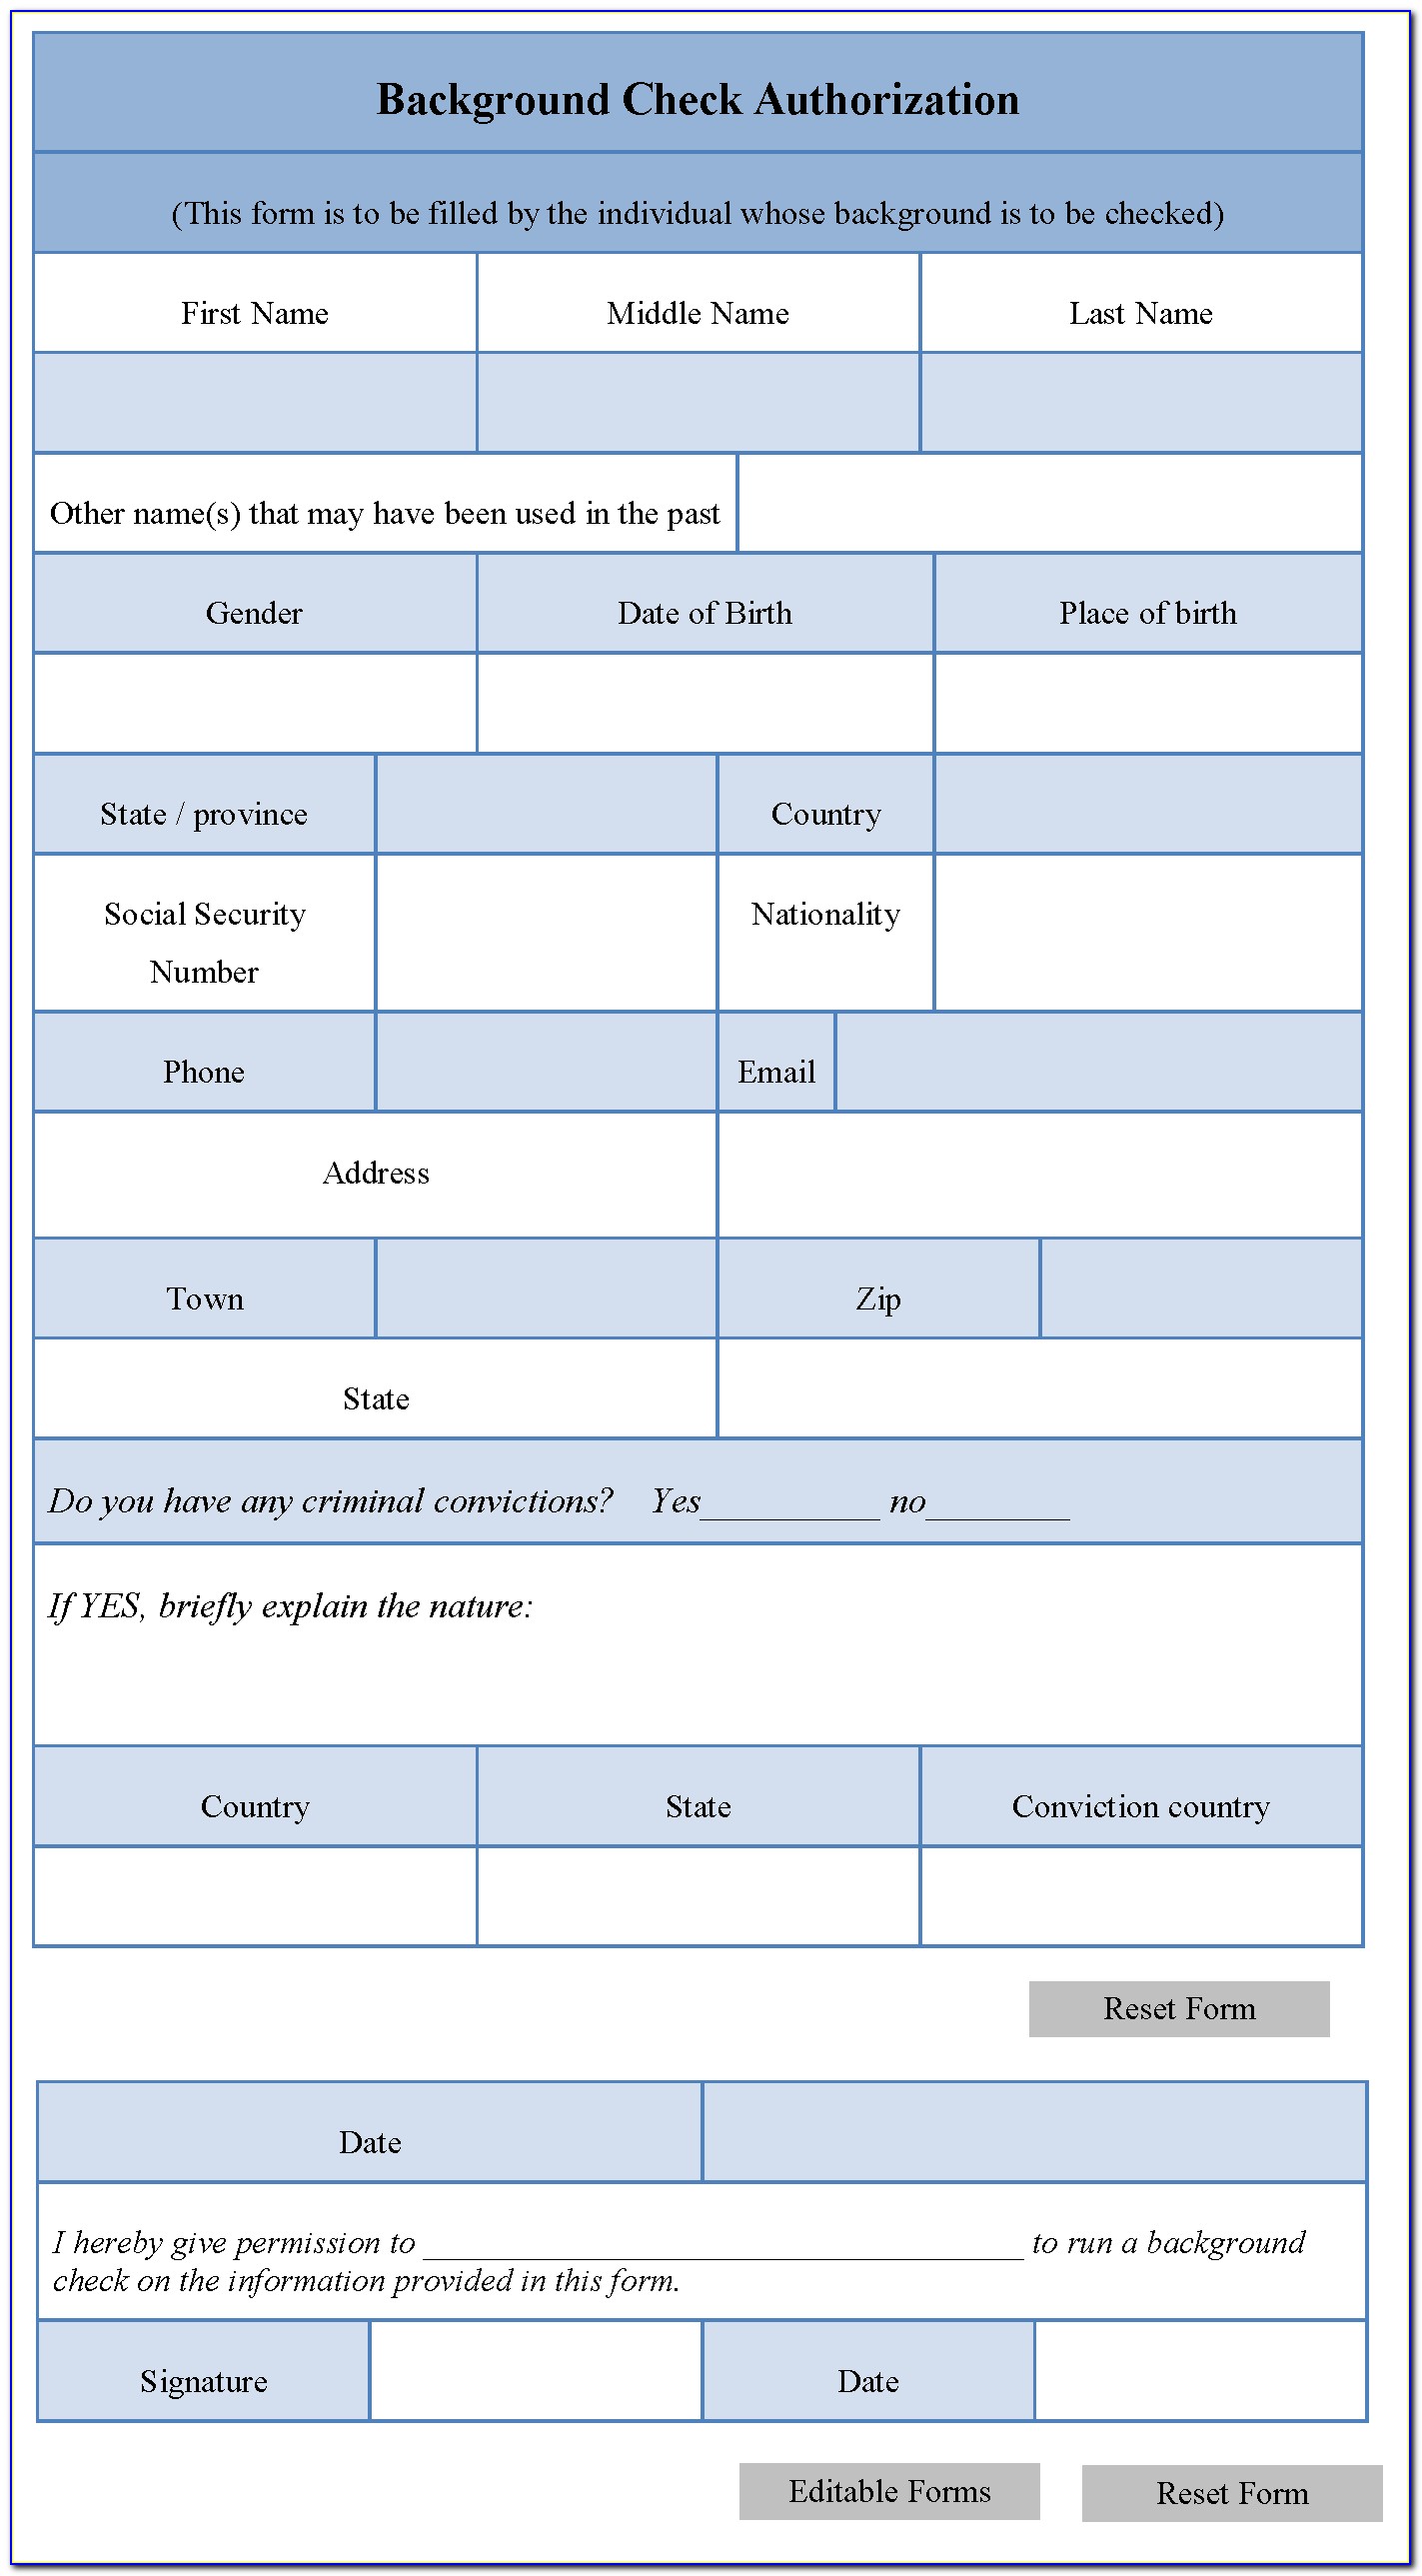 Employee Background Check Form Pdf